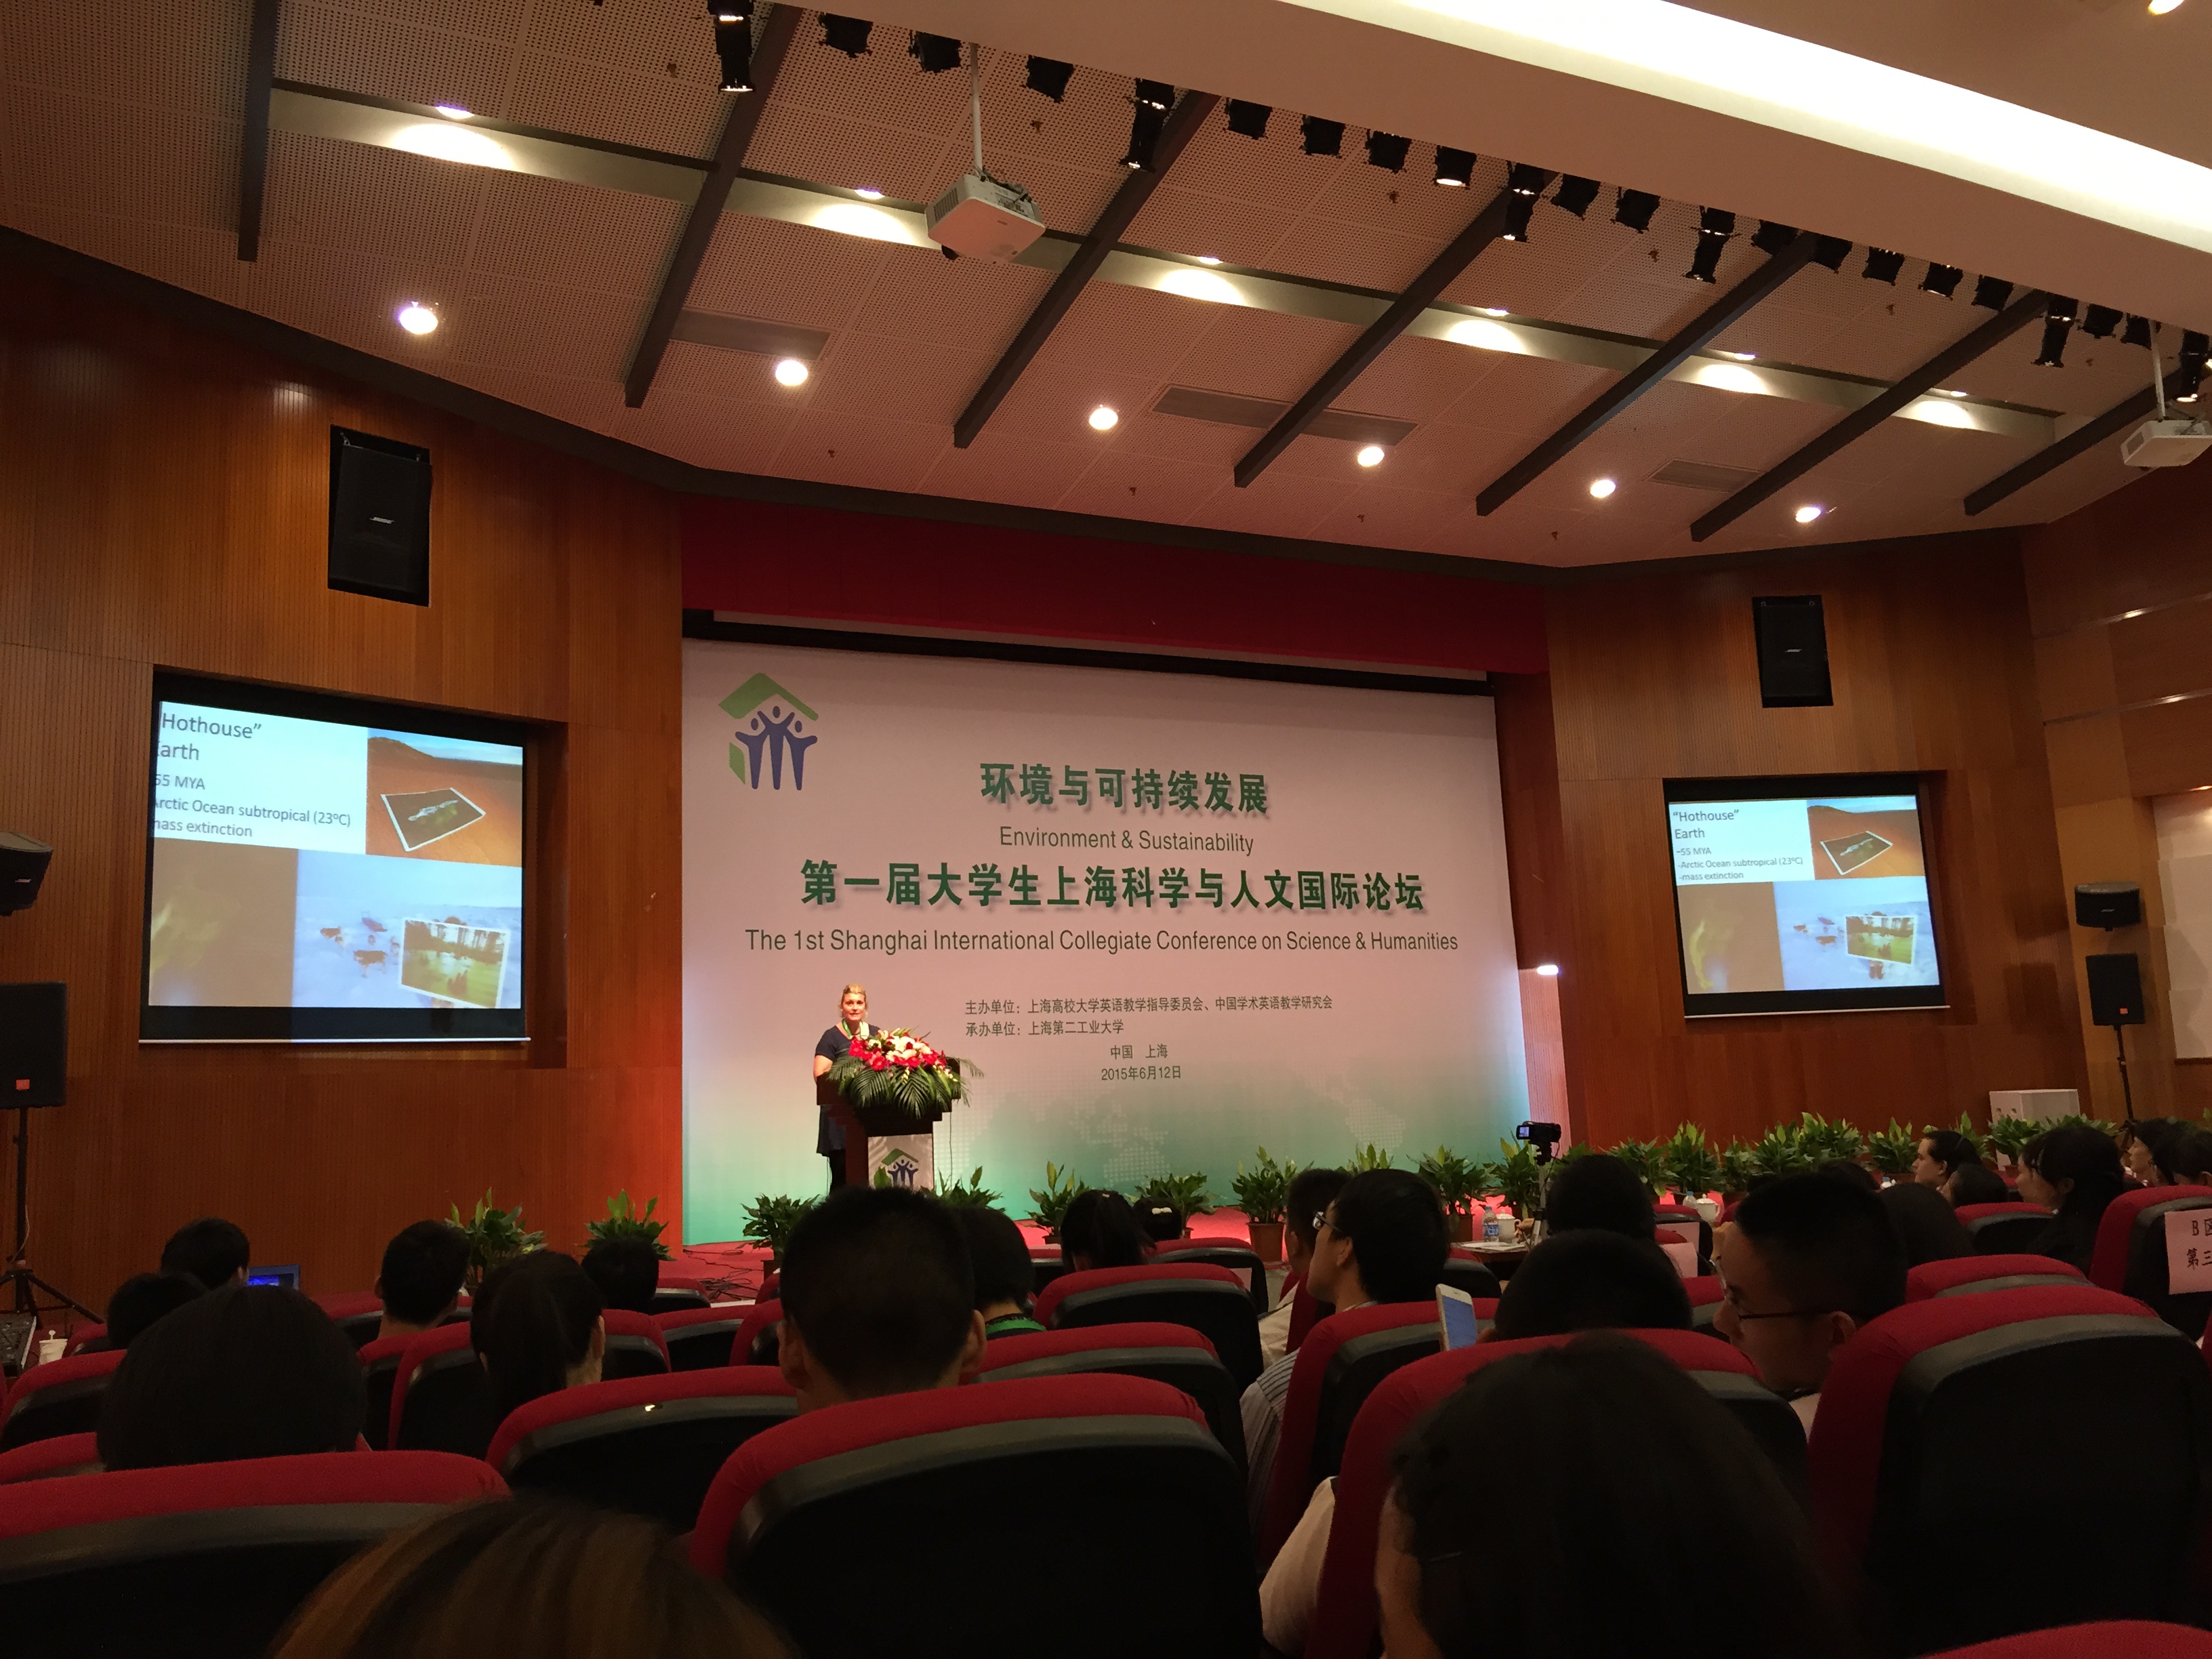 XJTLU Environmental Science Professors and Students Invited to Talk about Environment and Sustainability in Shanghai